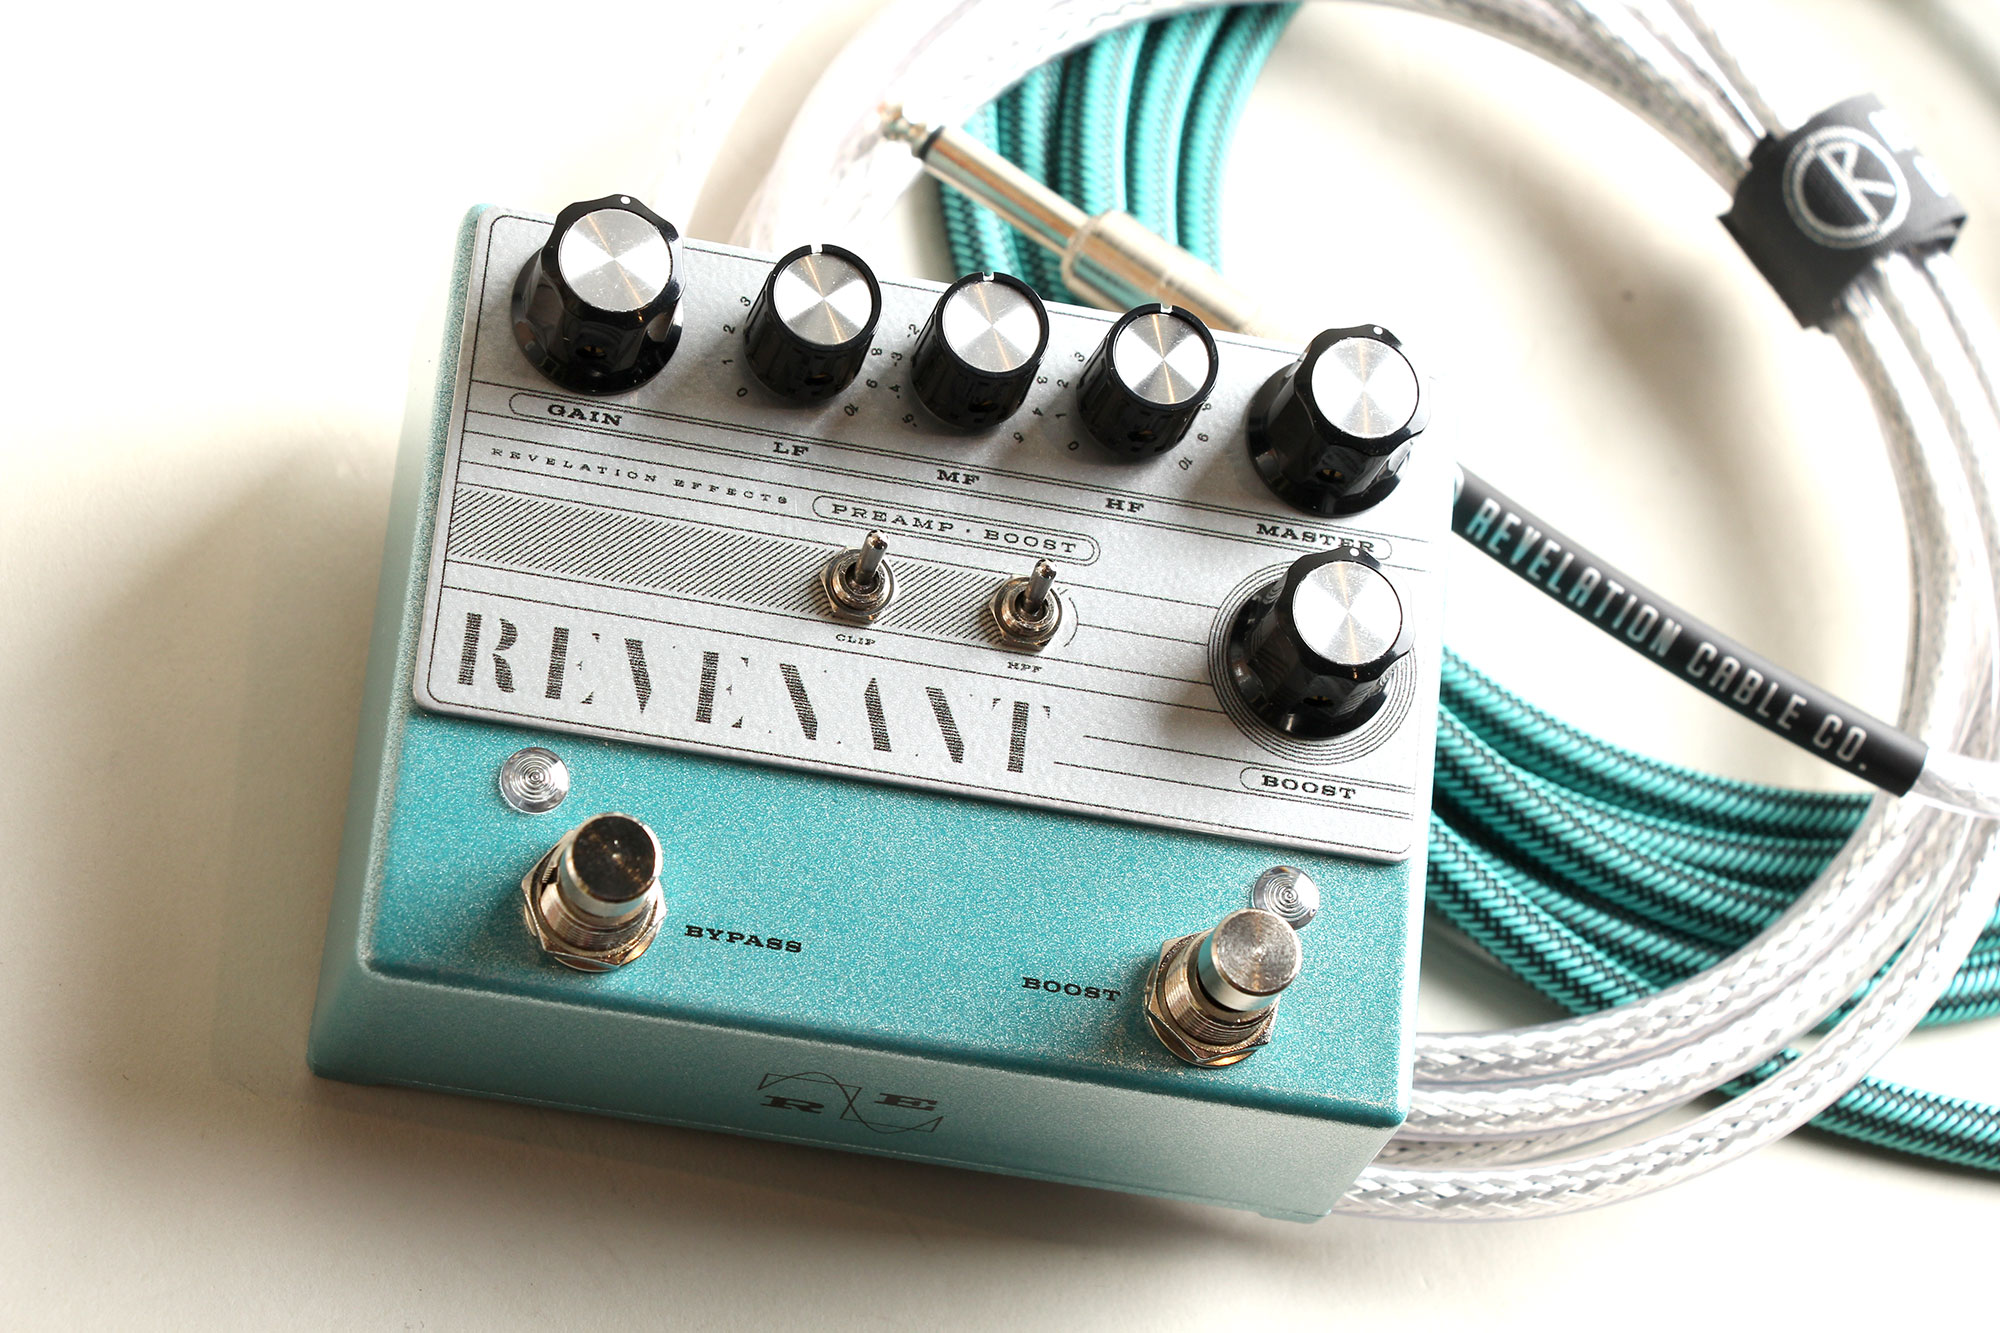 Revelation Effects REVENANT Preamp-Boost V1.2 -Teal Sparkle with Silver face plate- (Limited) レベレーションエフェクト サブ画像7